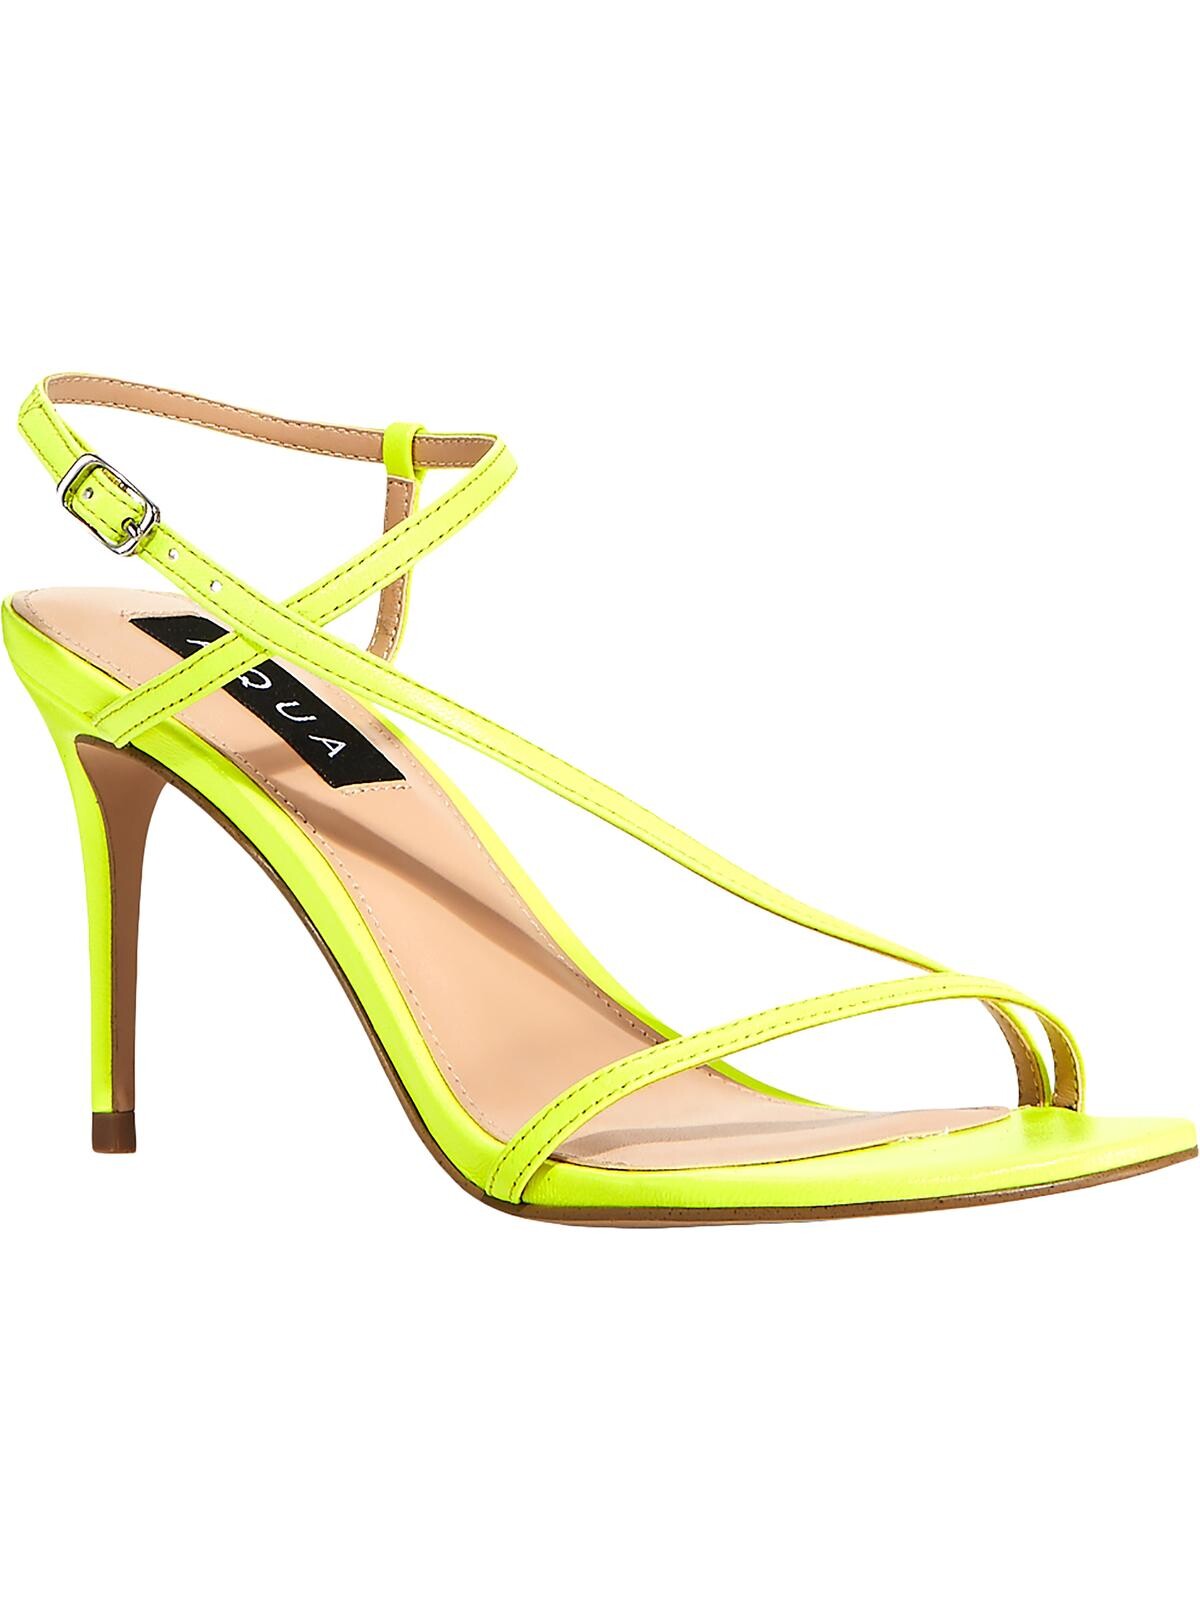 AQUA Womens Yellow Strappy Padded Ron Round Toe Stiletto Buckle Leather Slingback Sandal 9.5 M